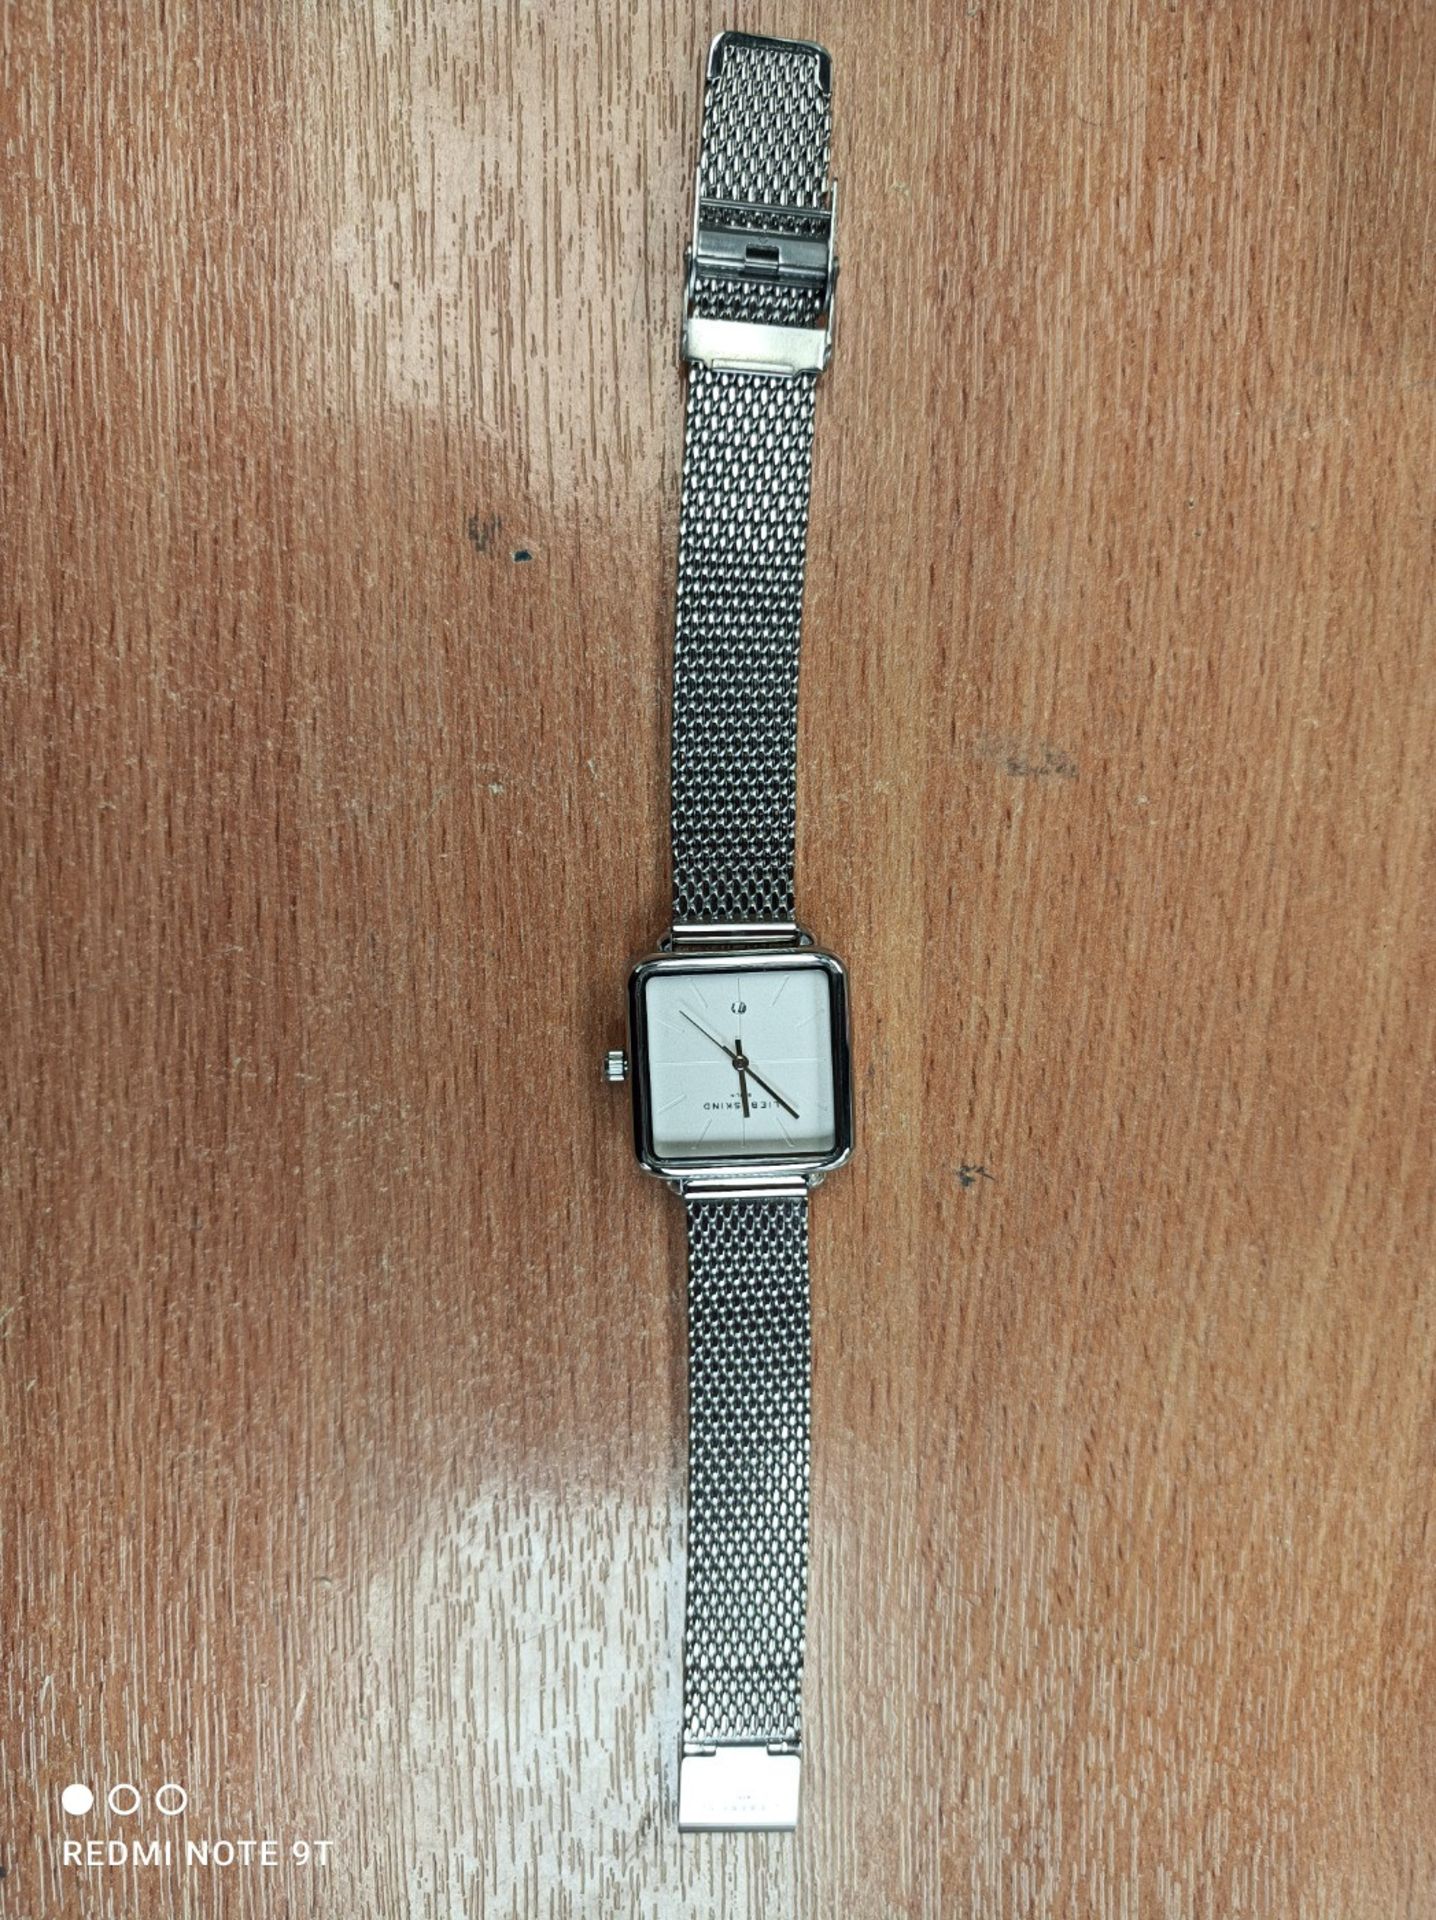 RRP £67.00 Liebeskind Berlin ladies analogue quartz watch with stainless steel bracelet LT-0150-M - Image 2 of 3